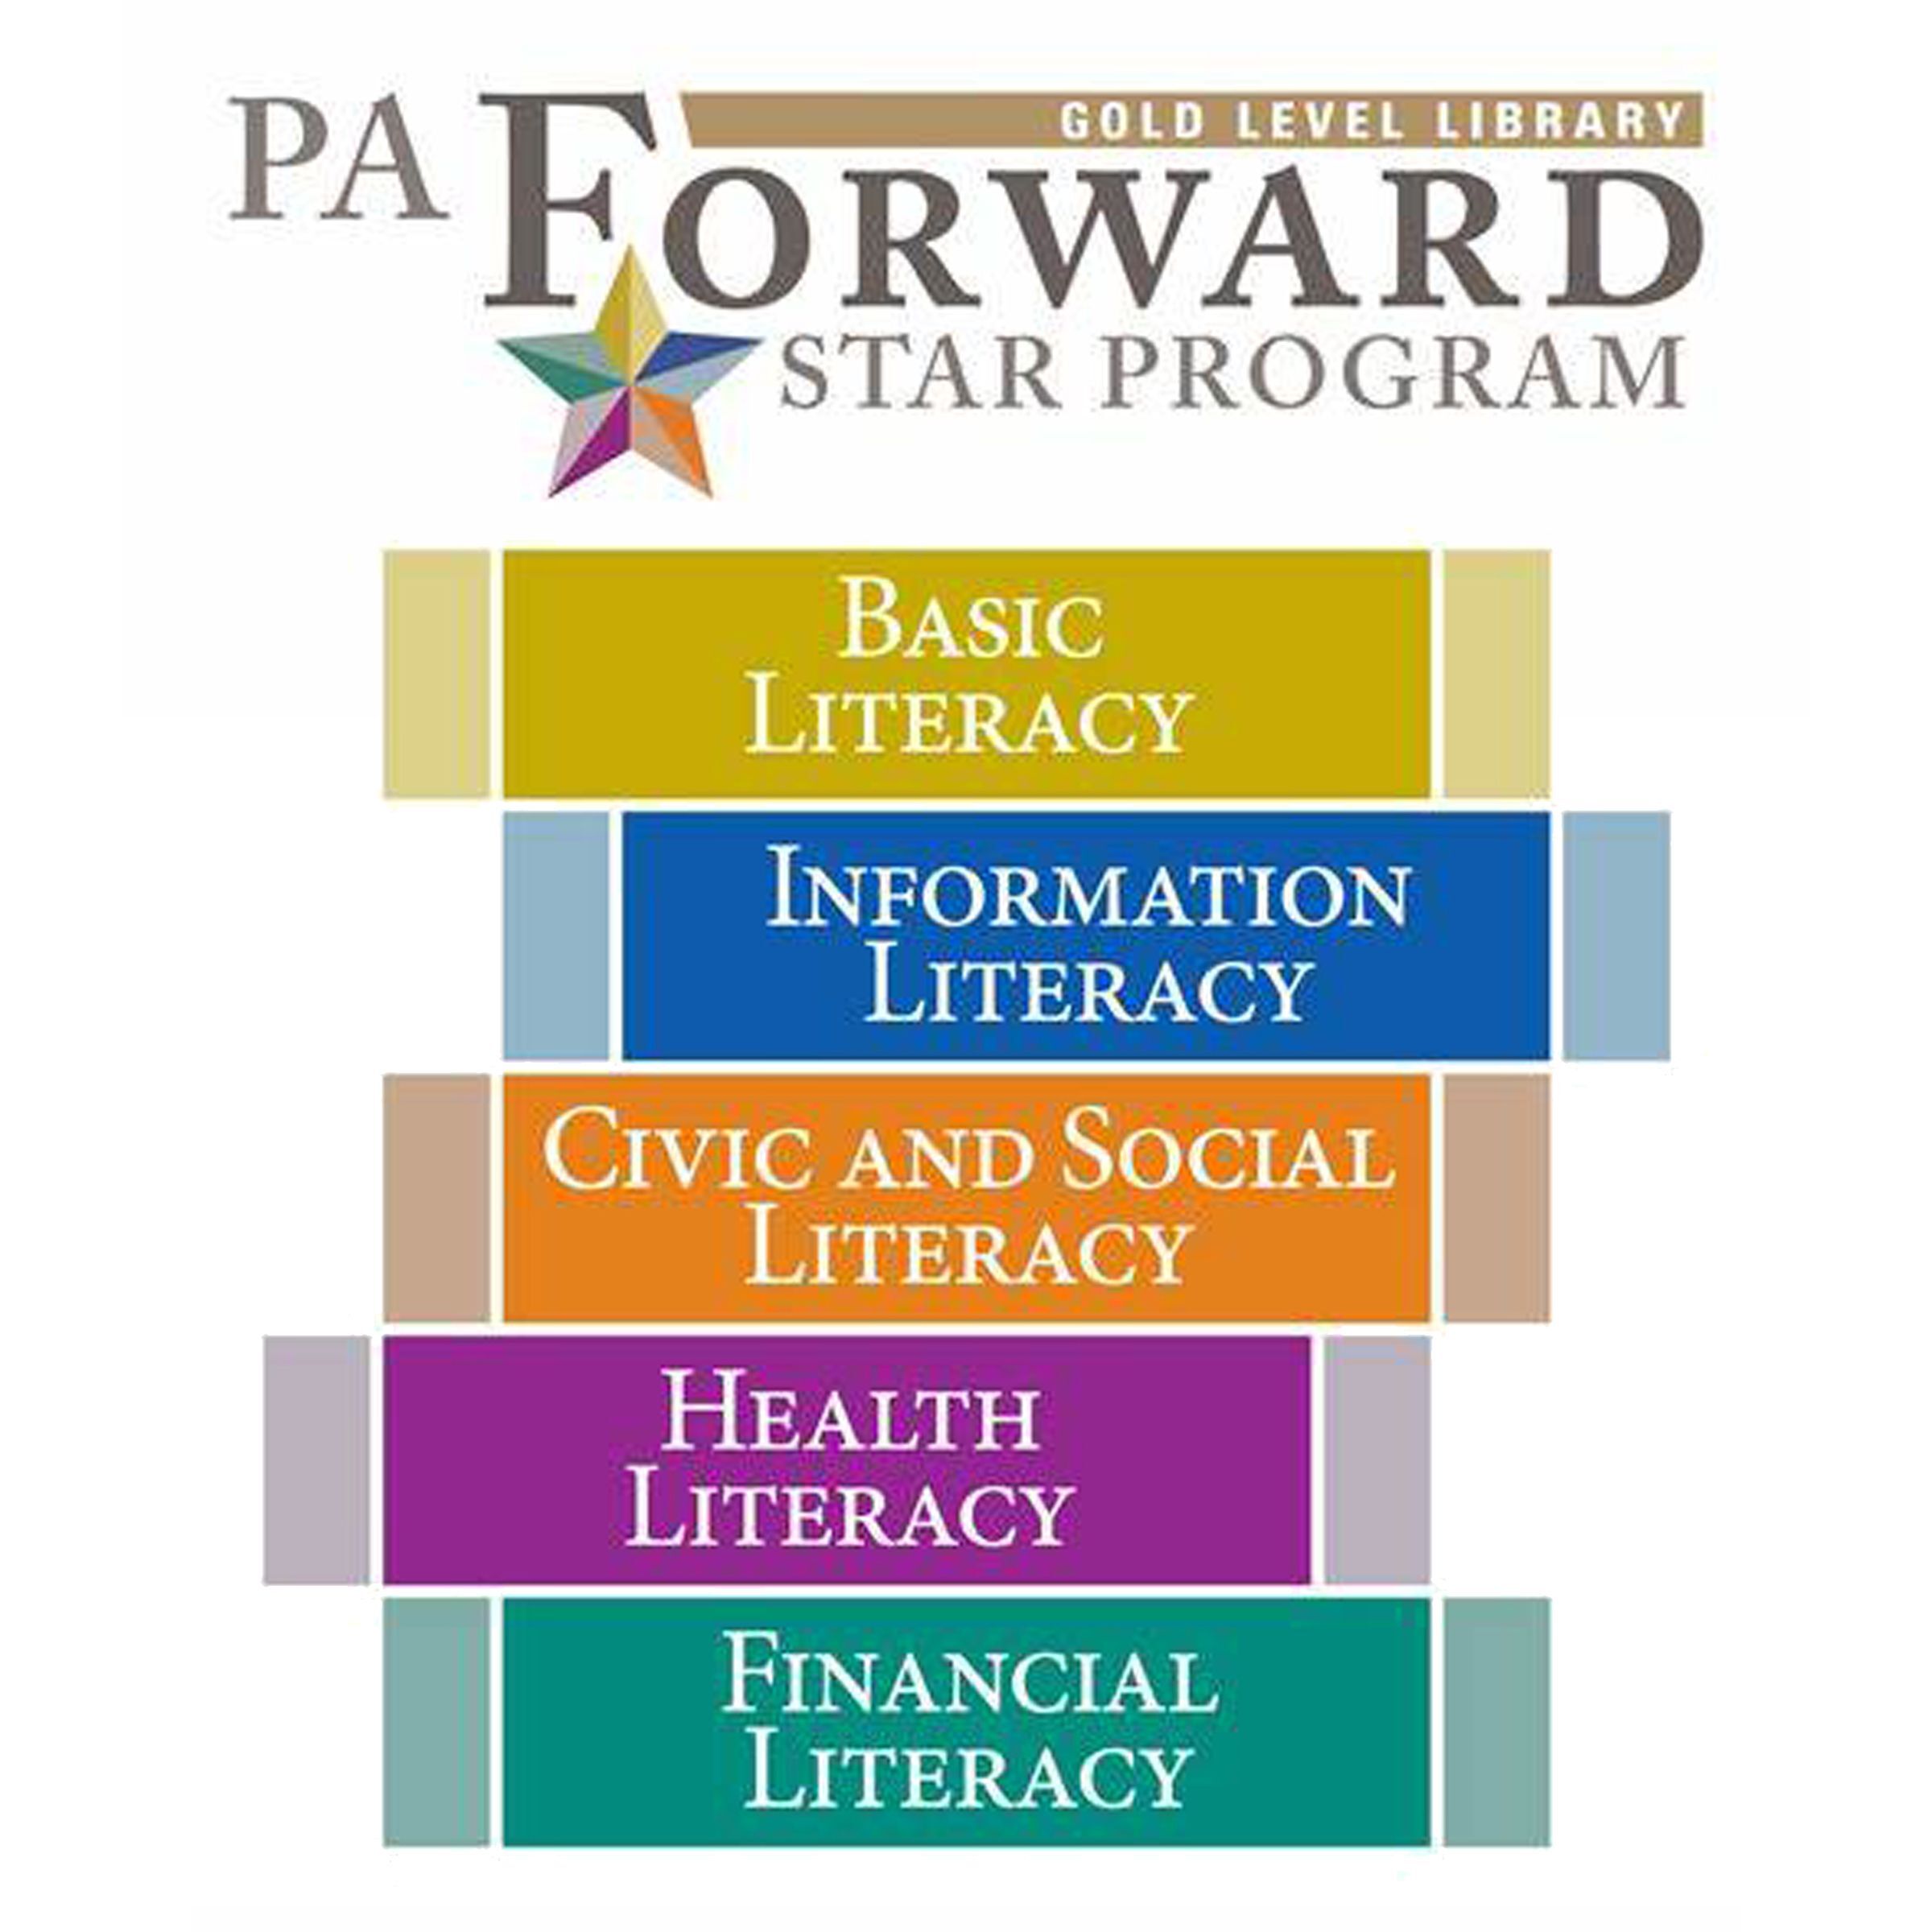 IFL is a PA Gold Library ... AGAIN!